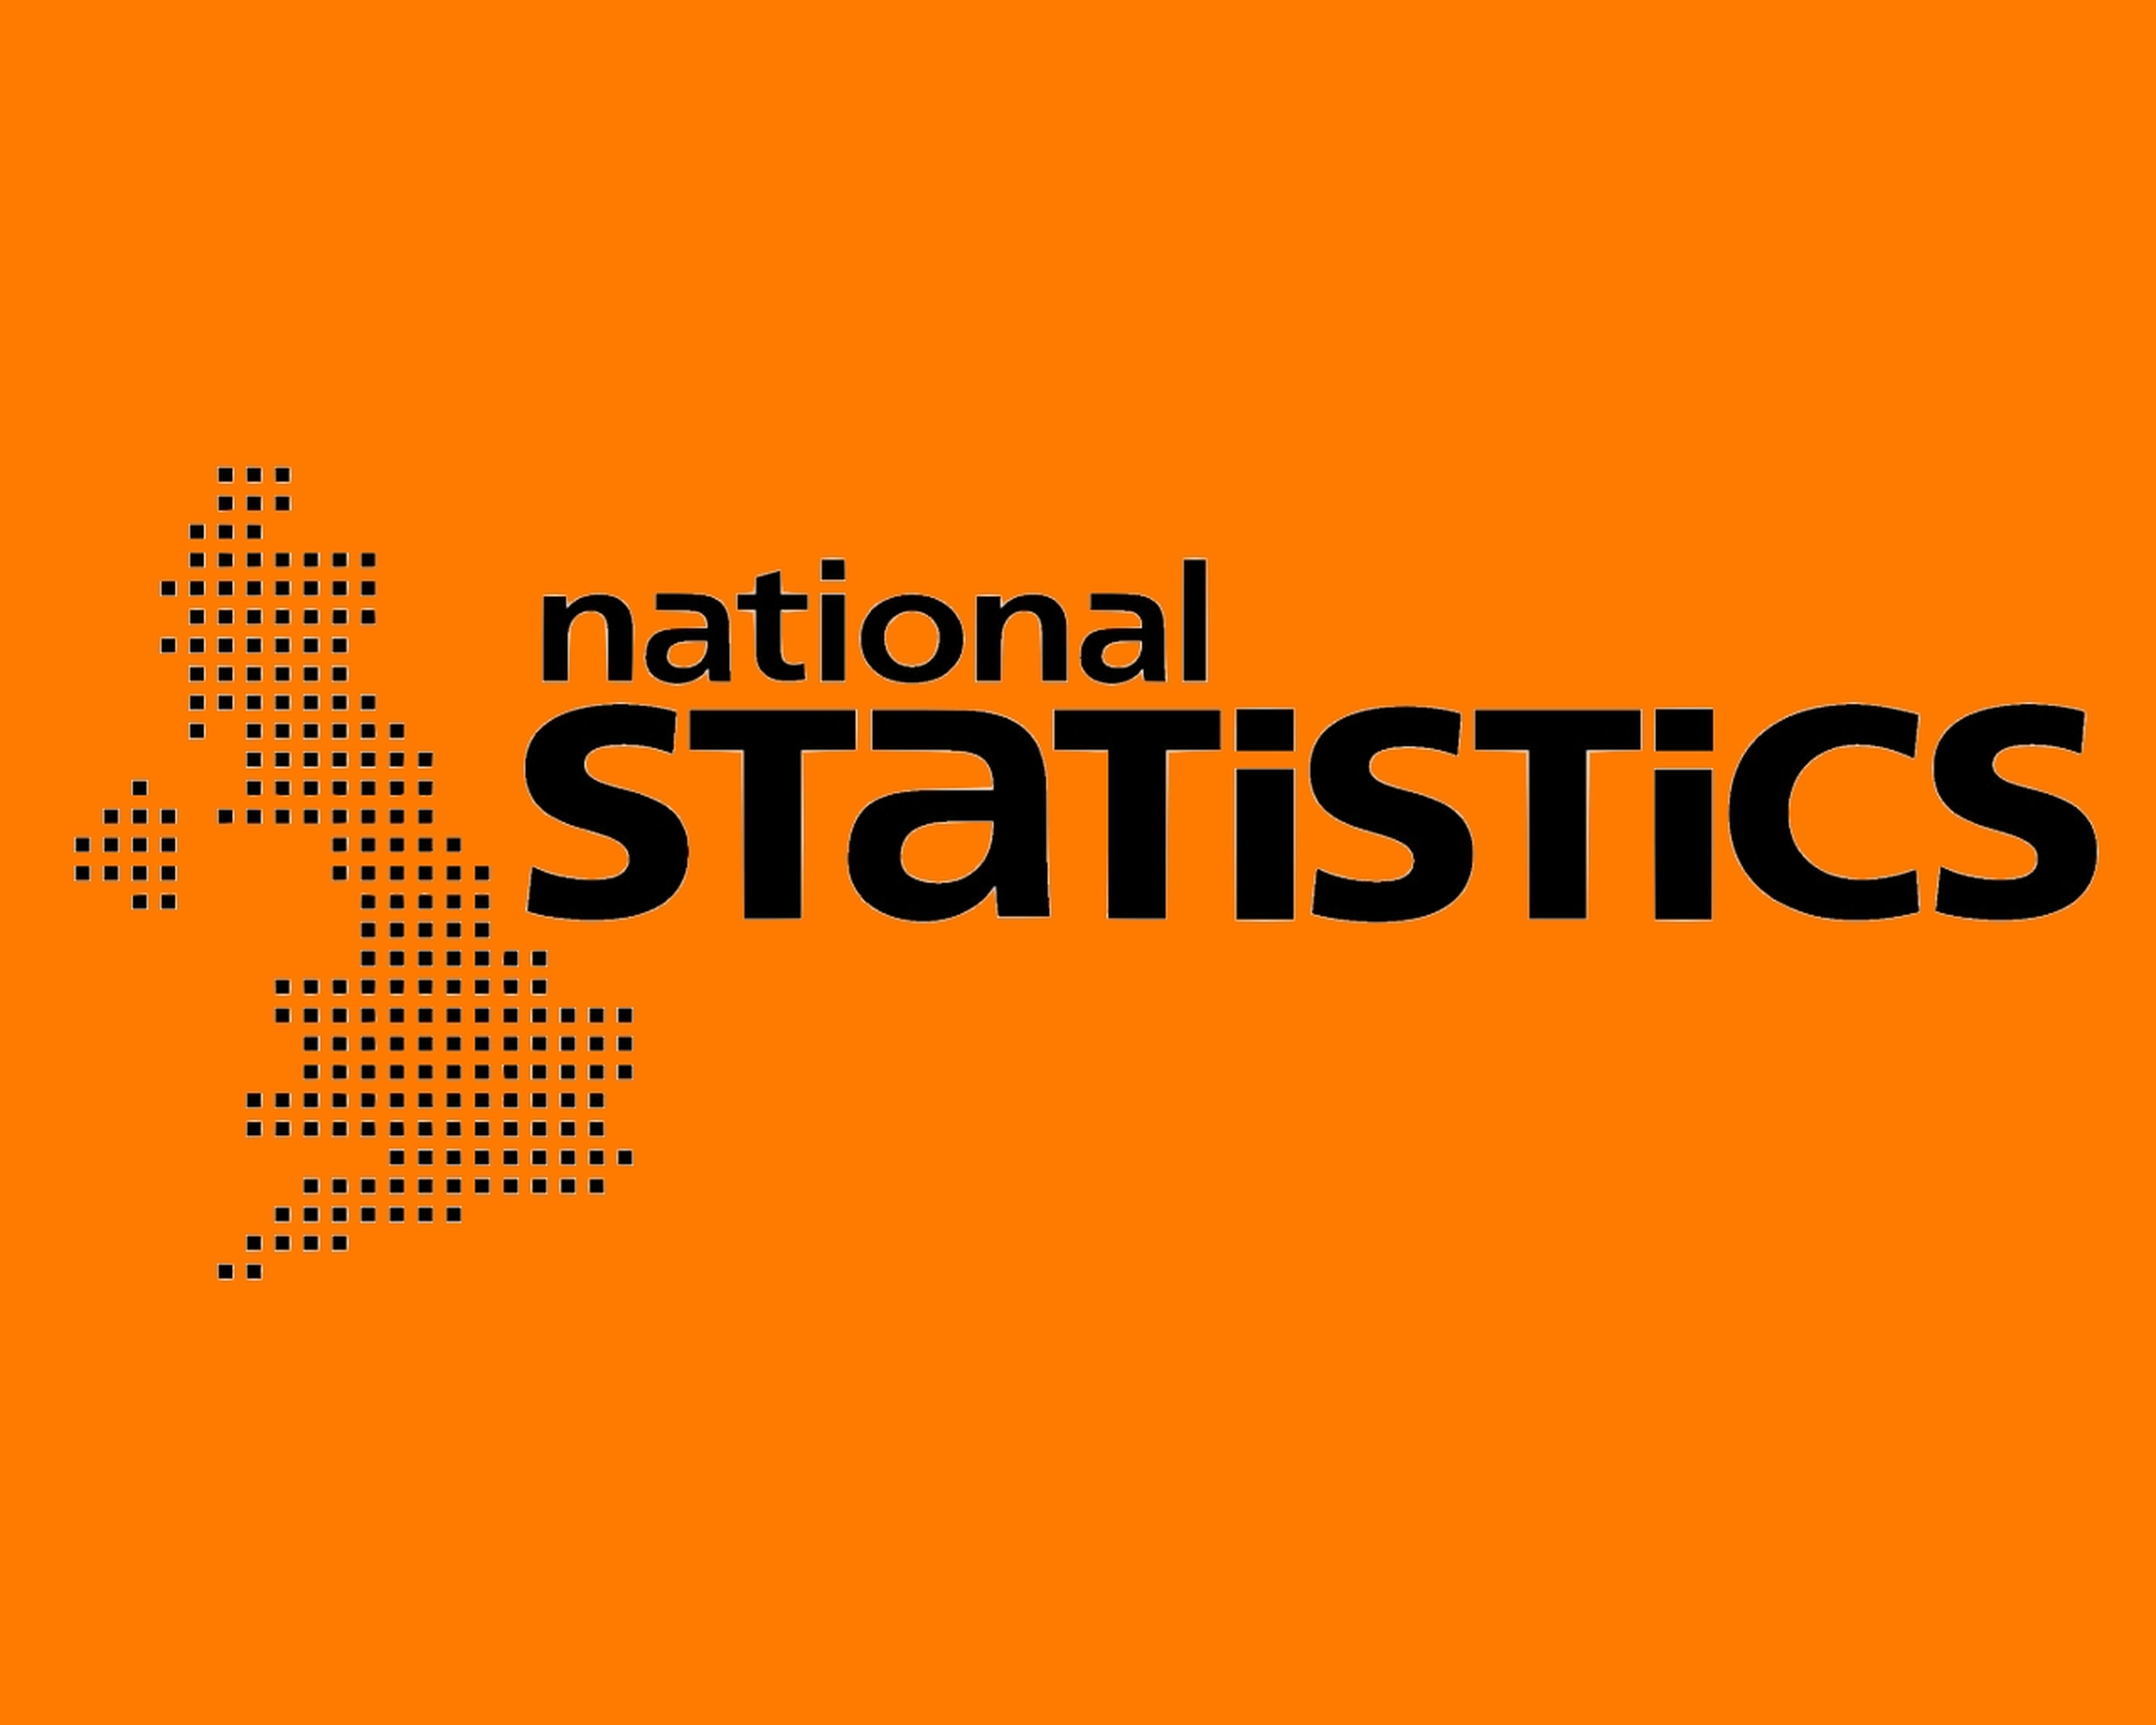 Office for National Statistics. Censo británico